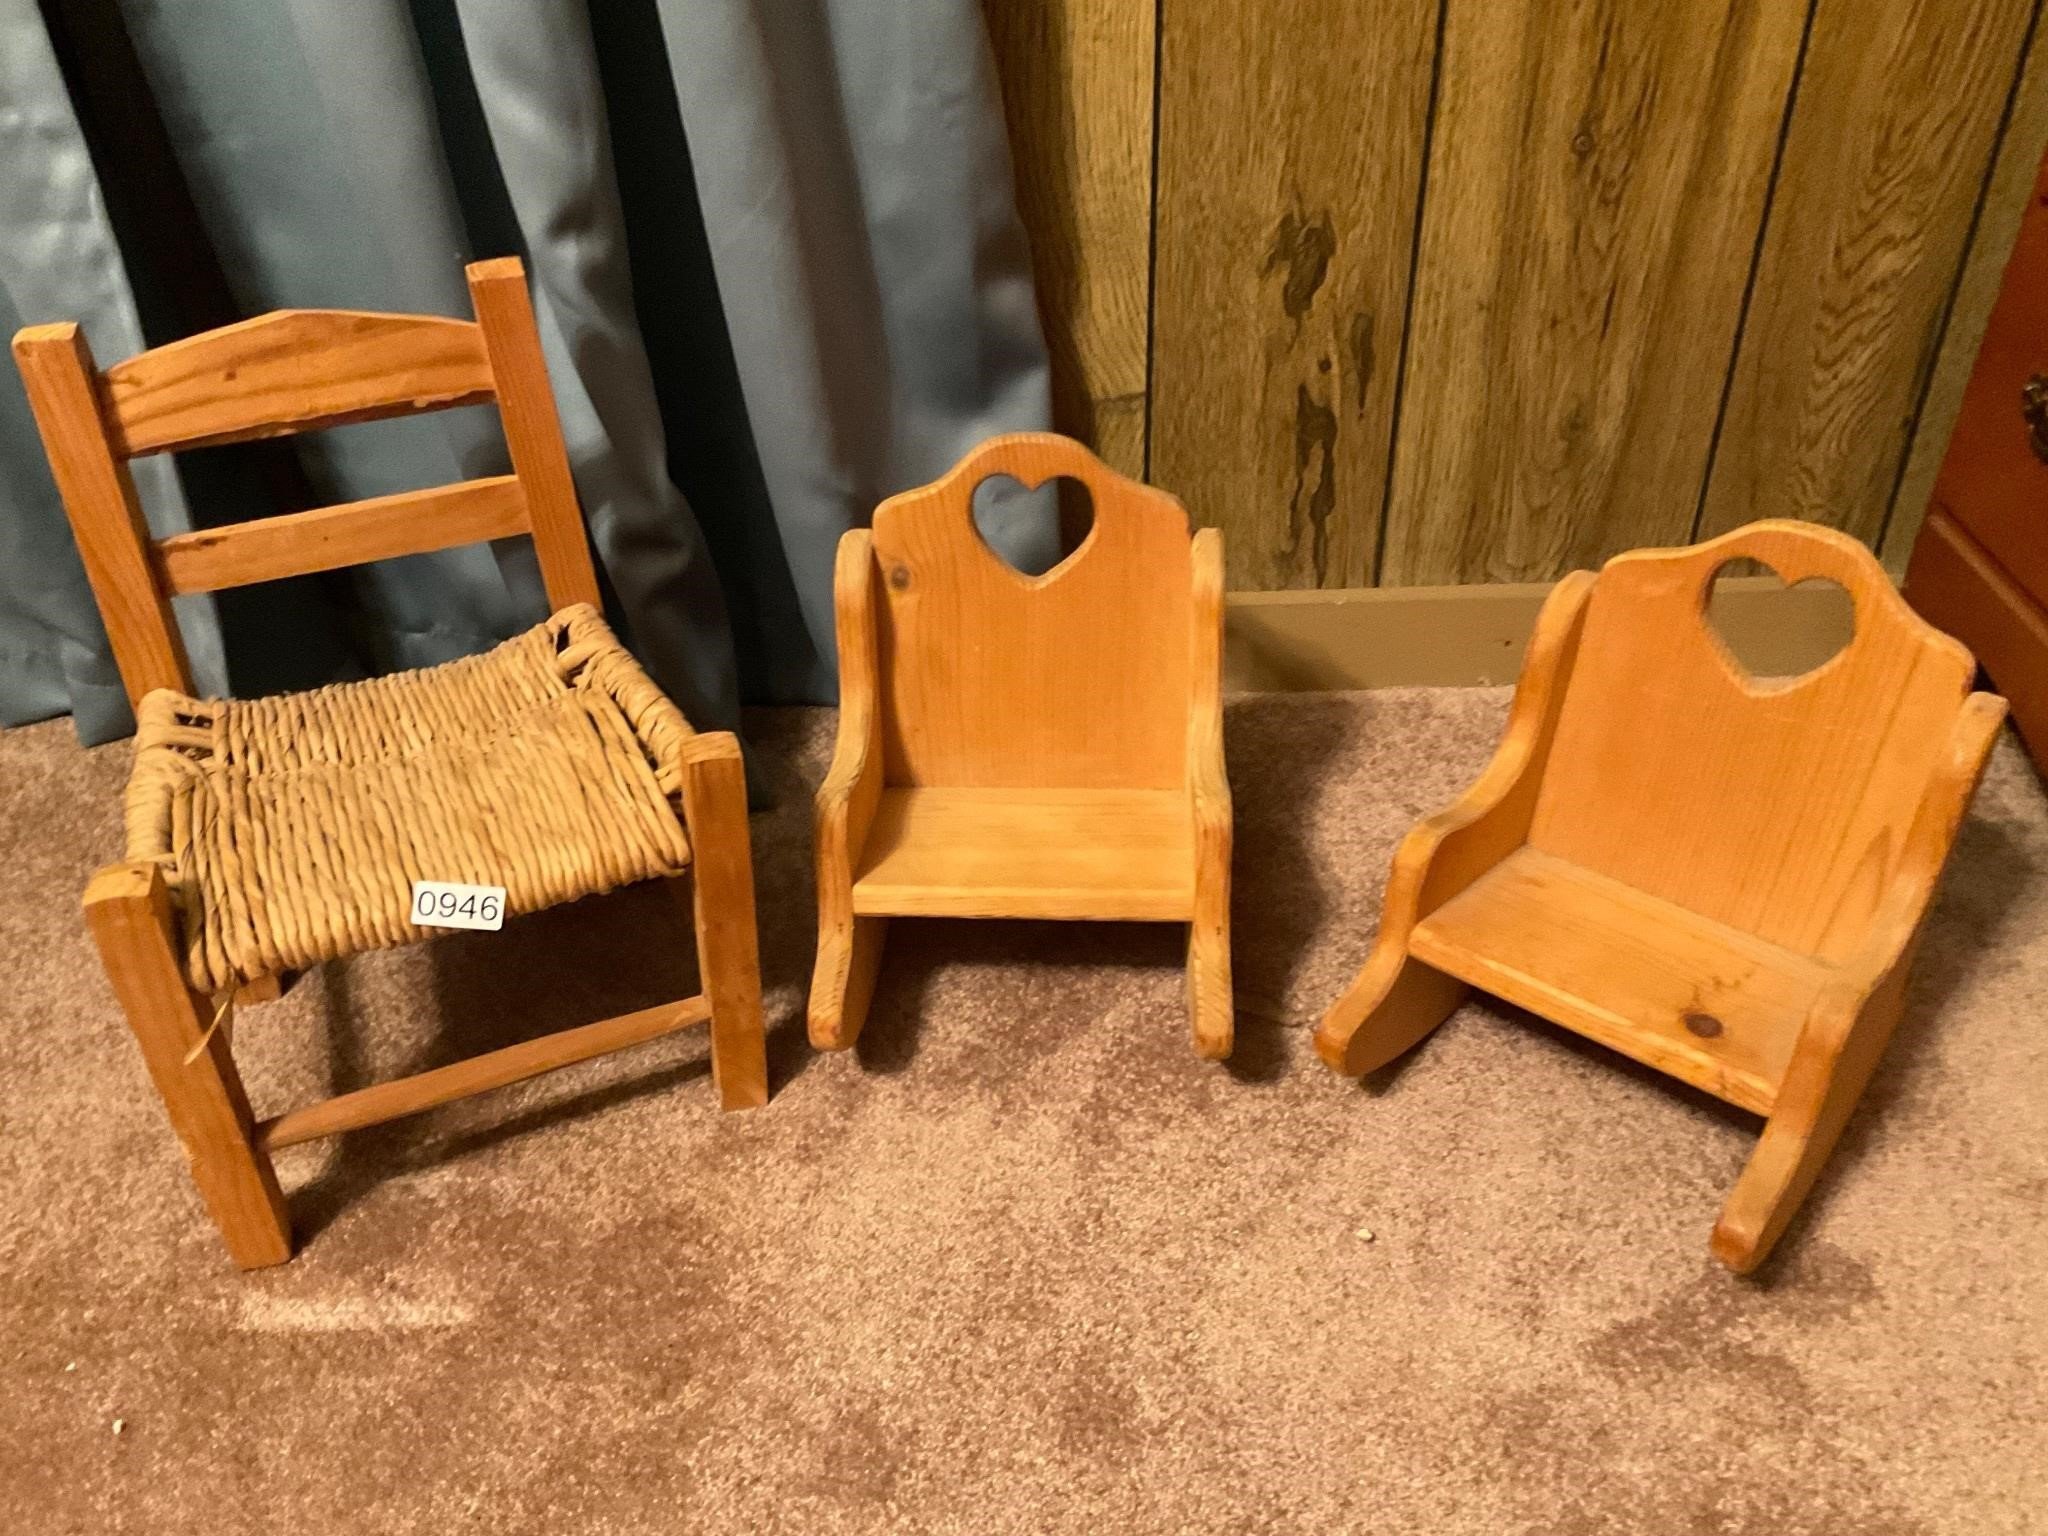 3- wooden doll chairs